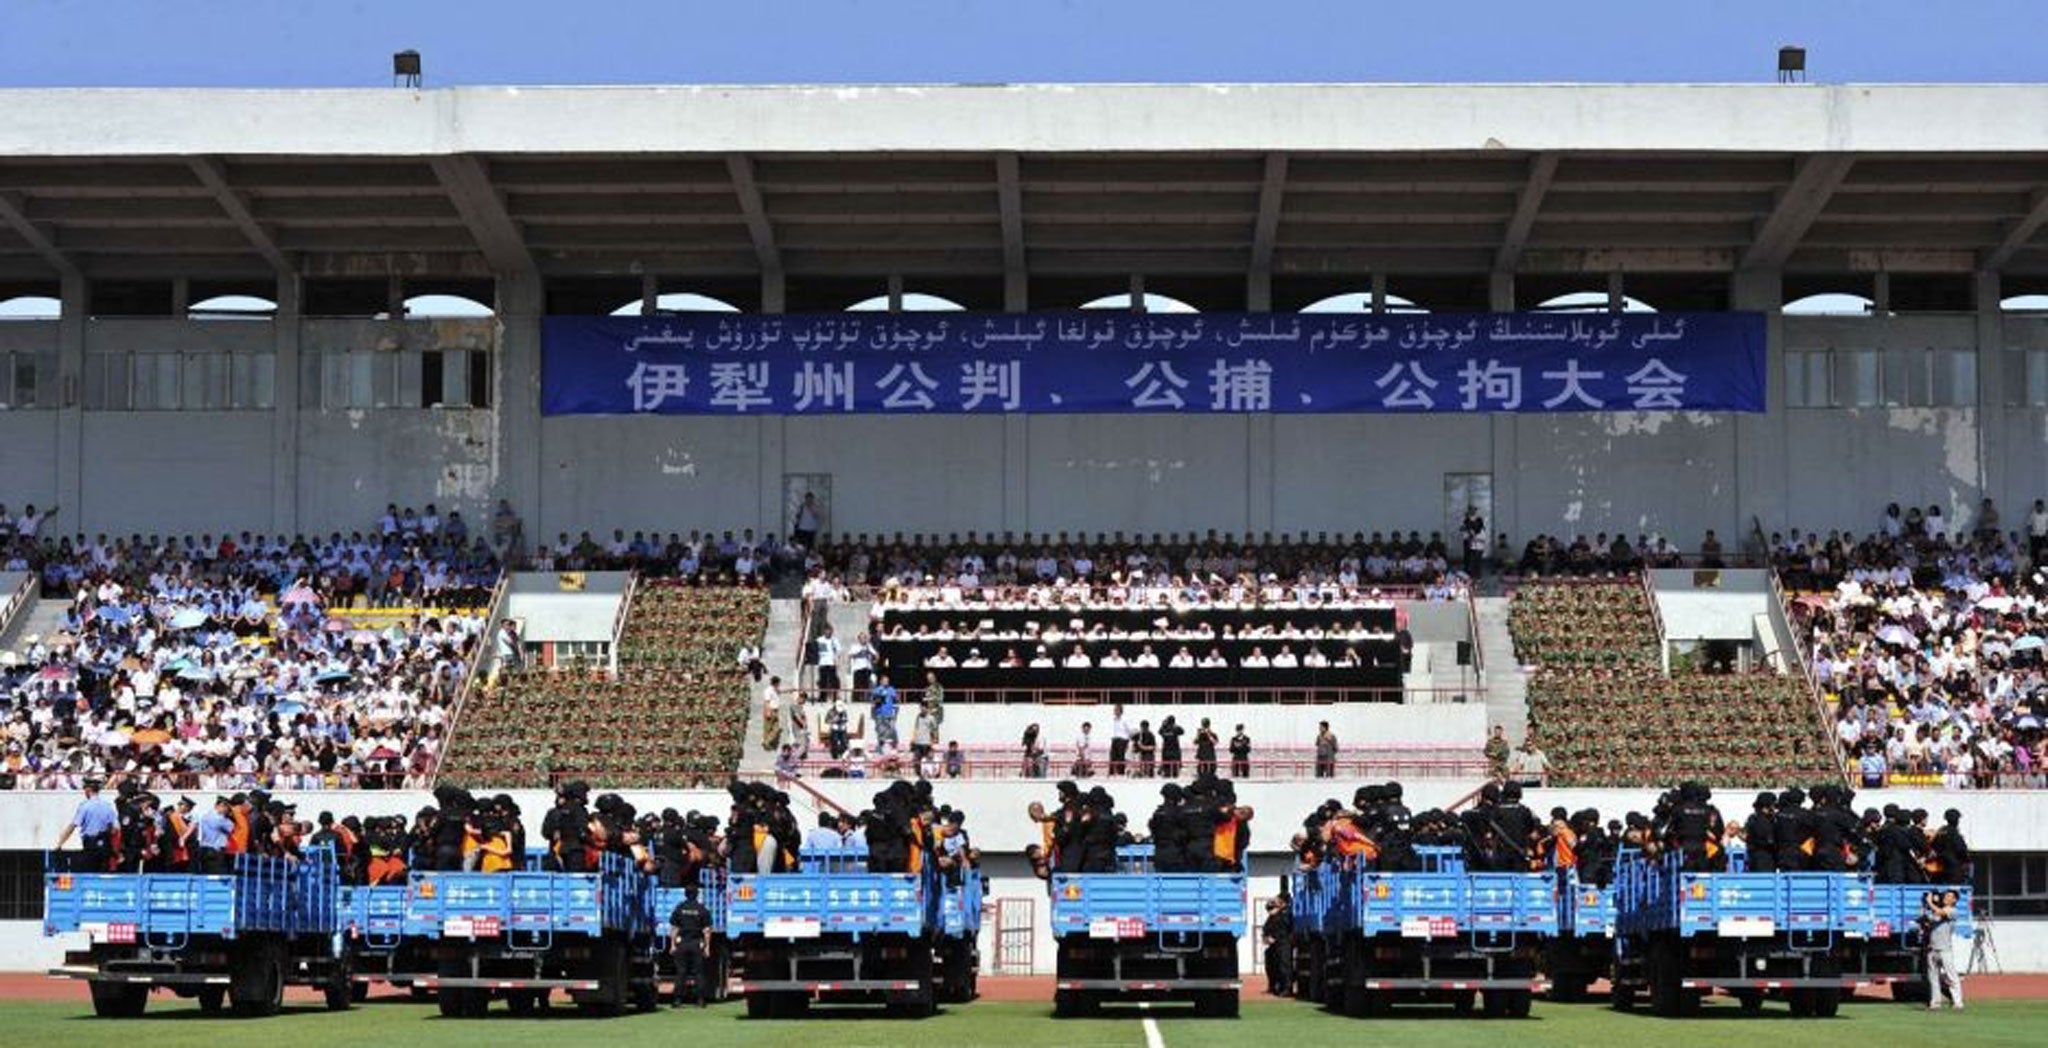 Trucks packed with criminals and suspects are seen during a mass sentencing rally at a stadium in Yili, Xinjiang Uighur Autonomous Region